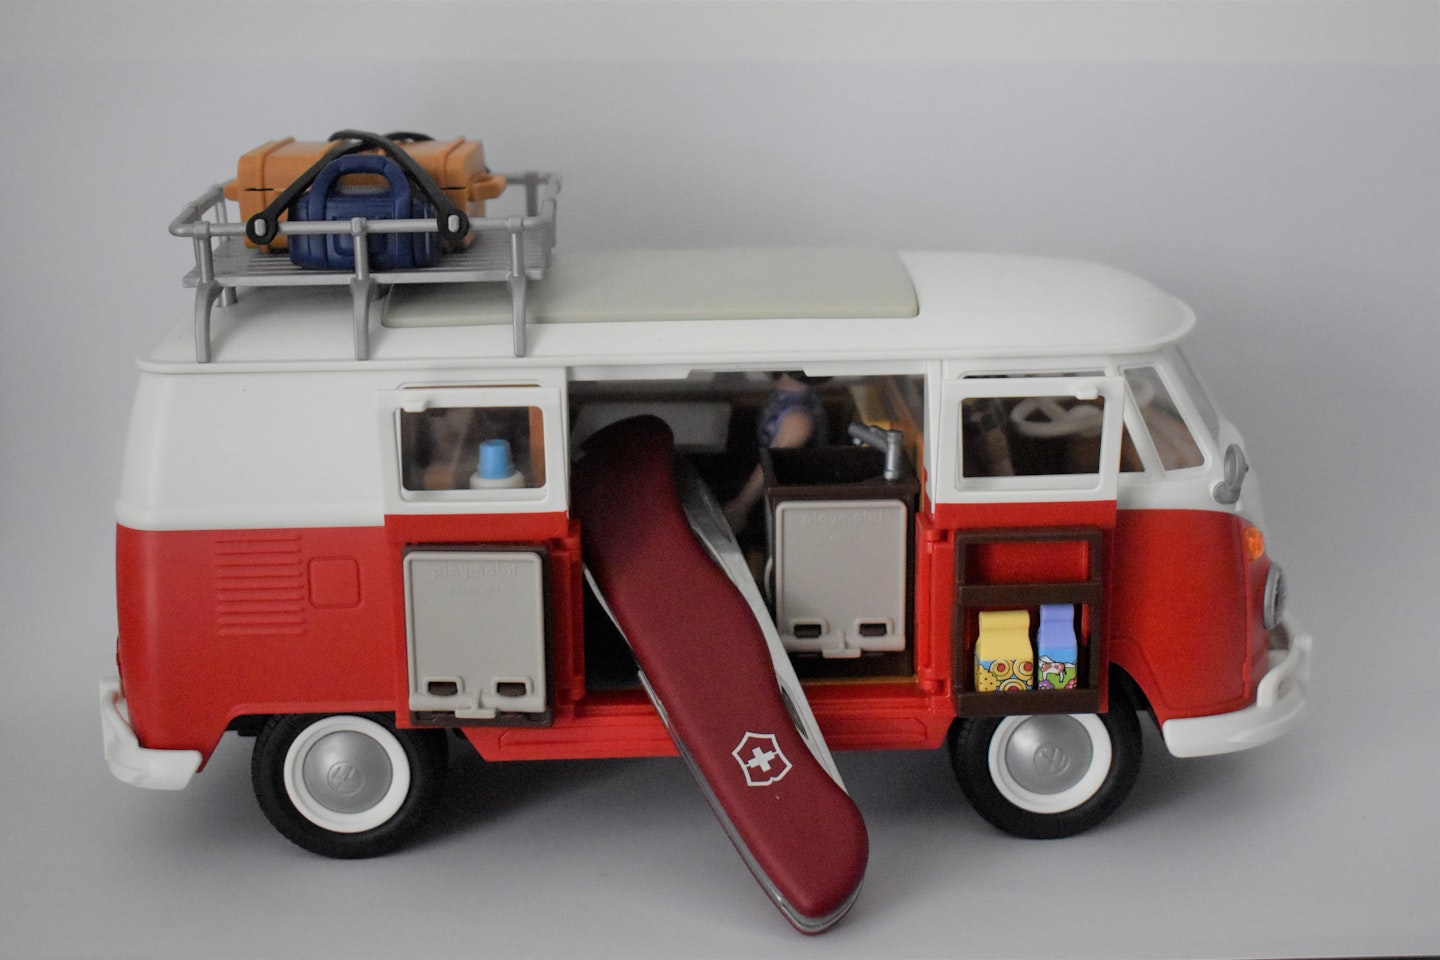 The Victorinox Adventurer pocket knife in a Playmobil VW T1 Camping Bus